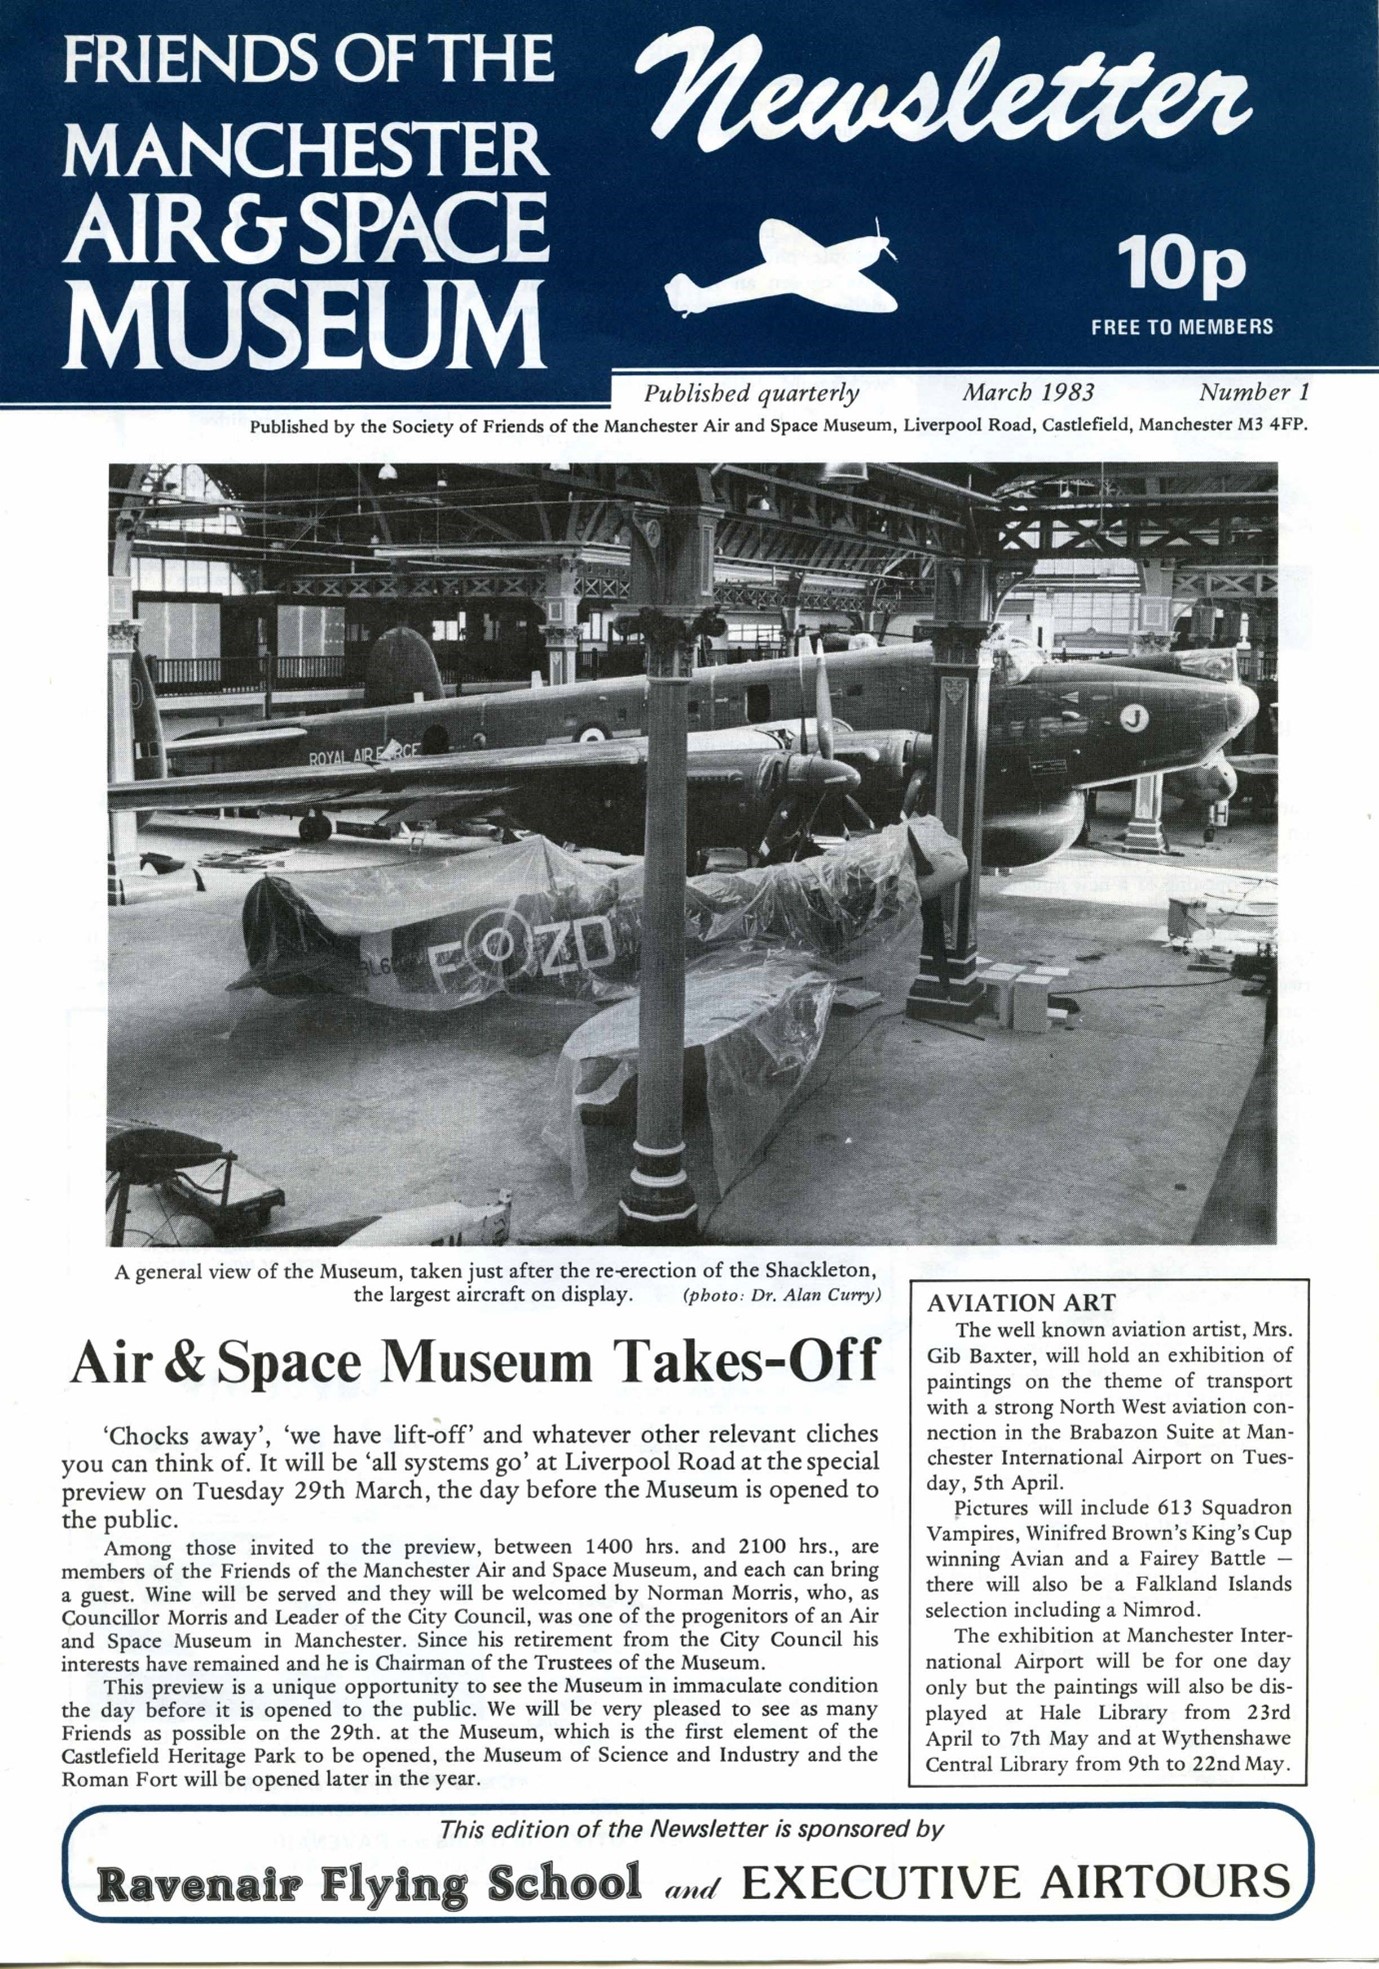 The front page of issue number 1 of the Newsletter of the Friends of the Manchester Air & Space Museum, March 1983. 